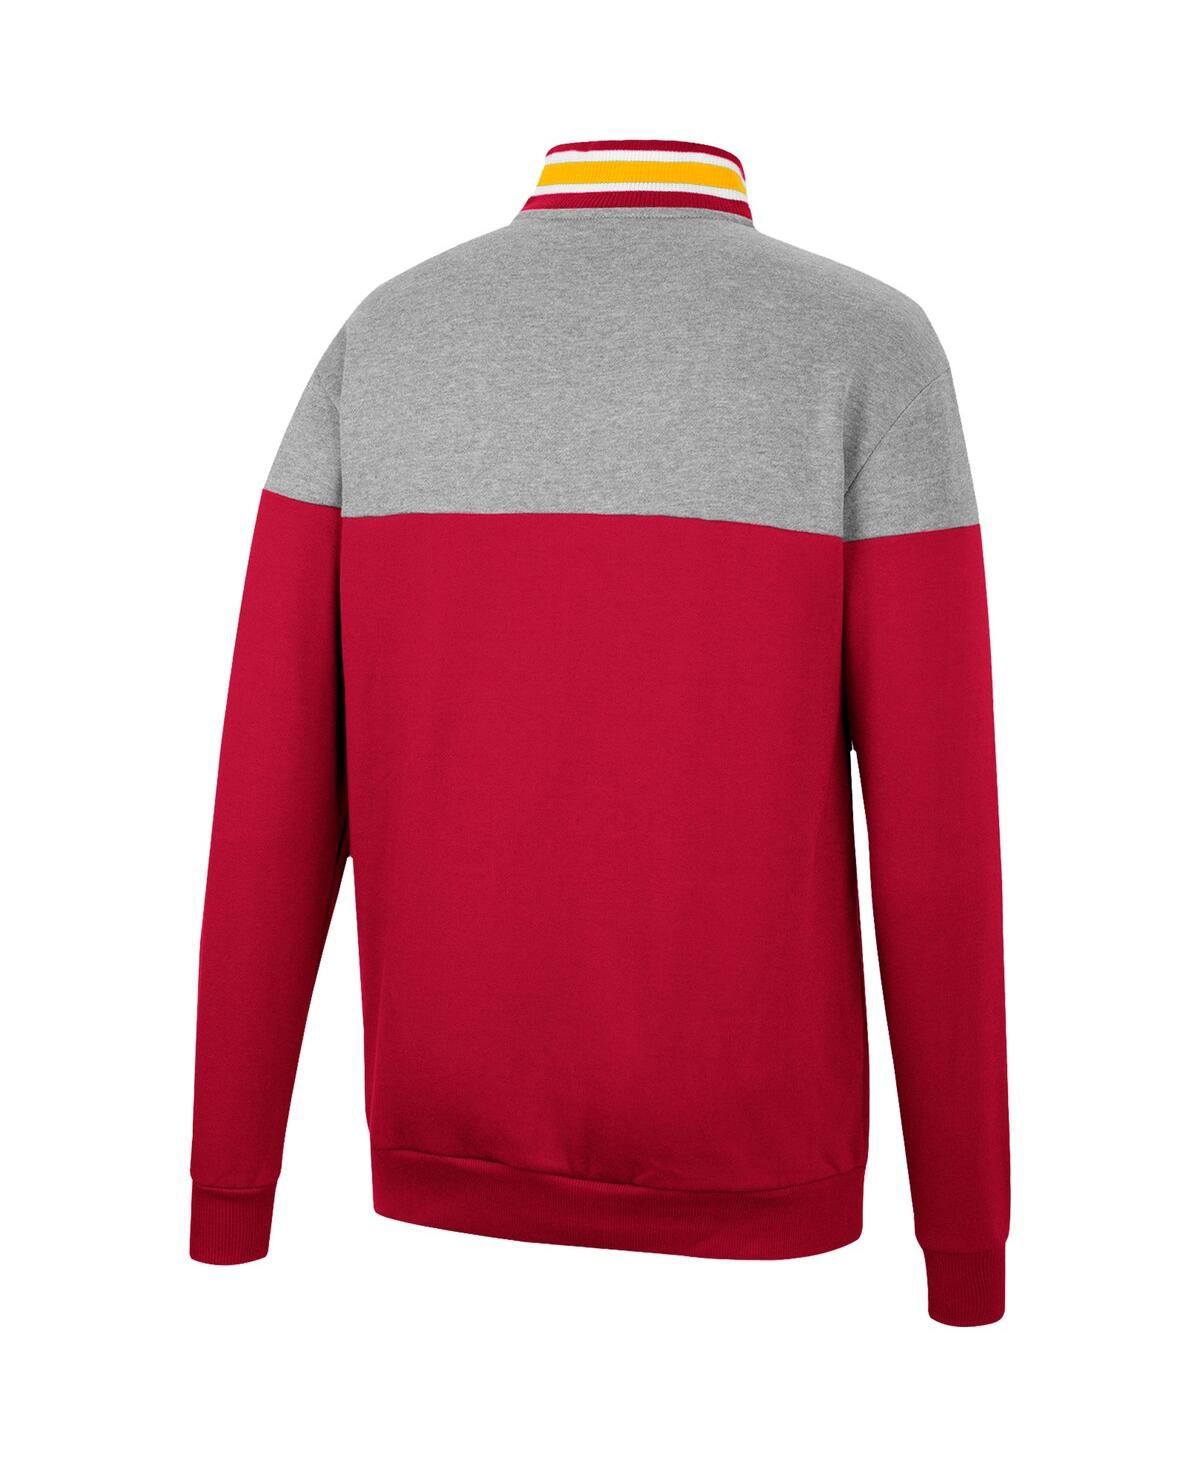 Shop Colosseum Men's  Heathered Gray And Cardinal Iowa State Cyclones Be The Ball Quarter-zip Top In Heathered Gray,cardinal